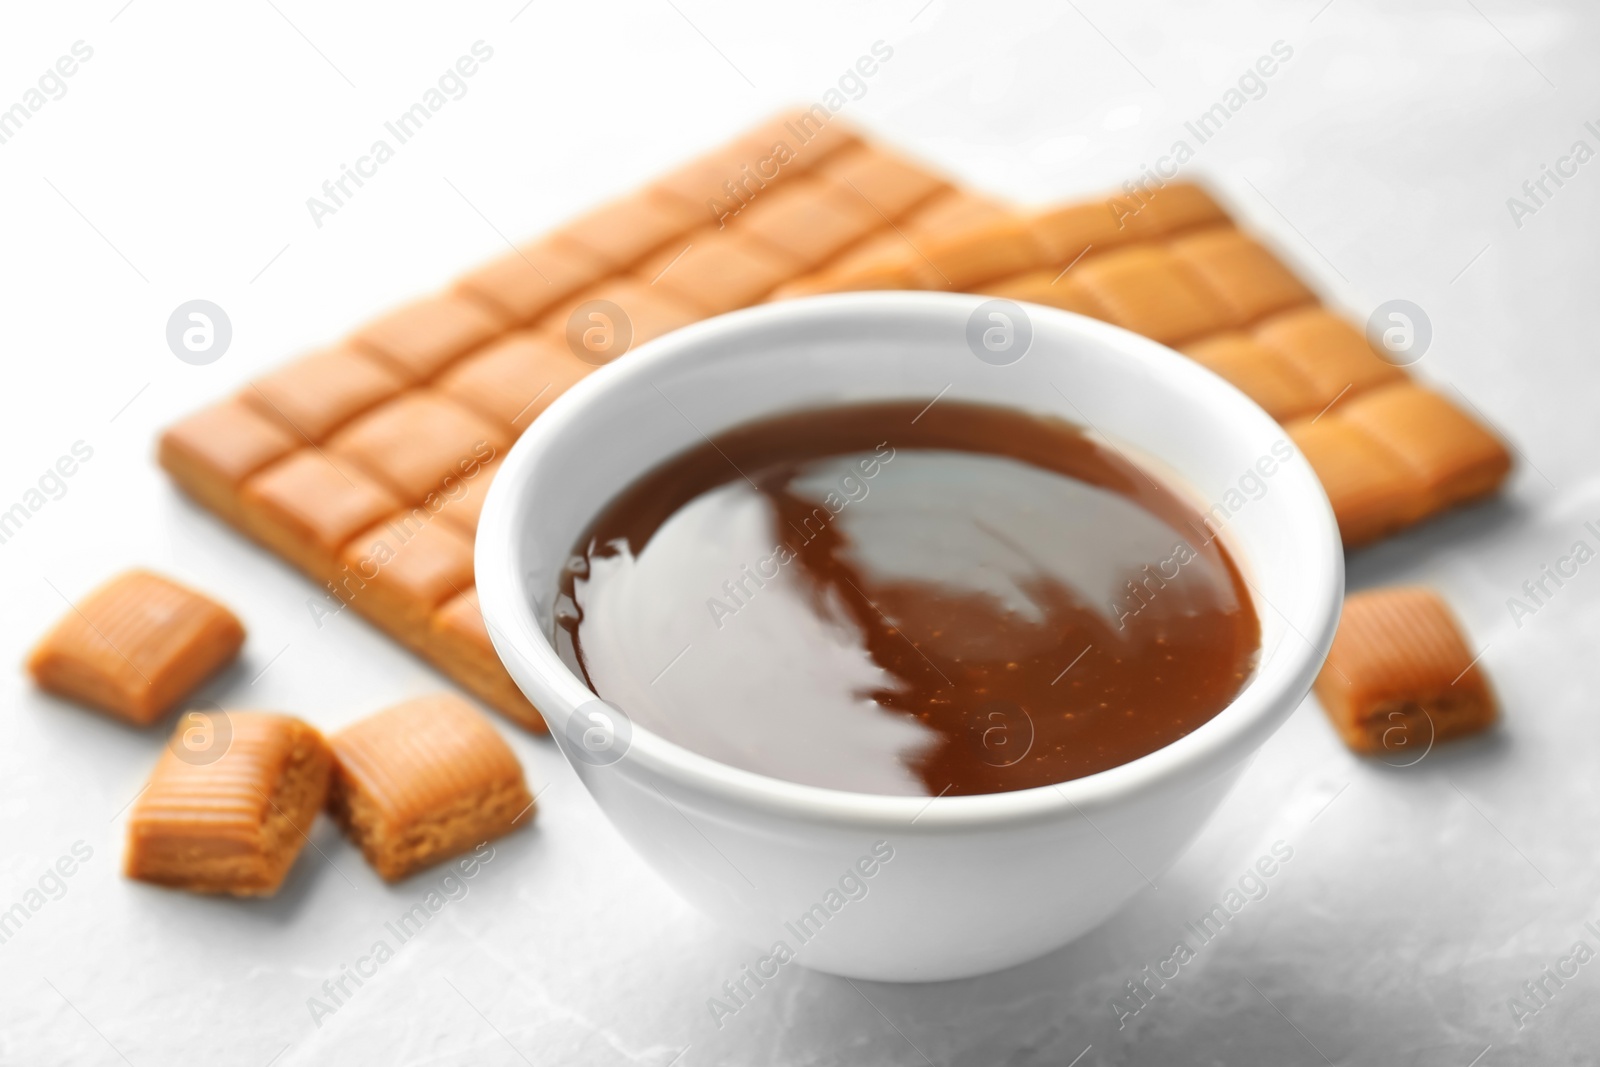 Photo of Delicious caramel candies and sauce on light background